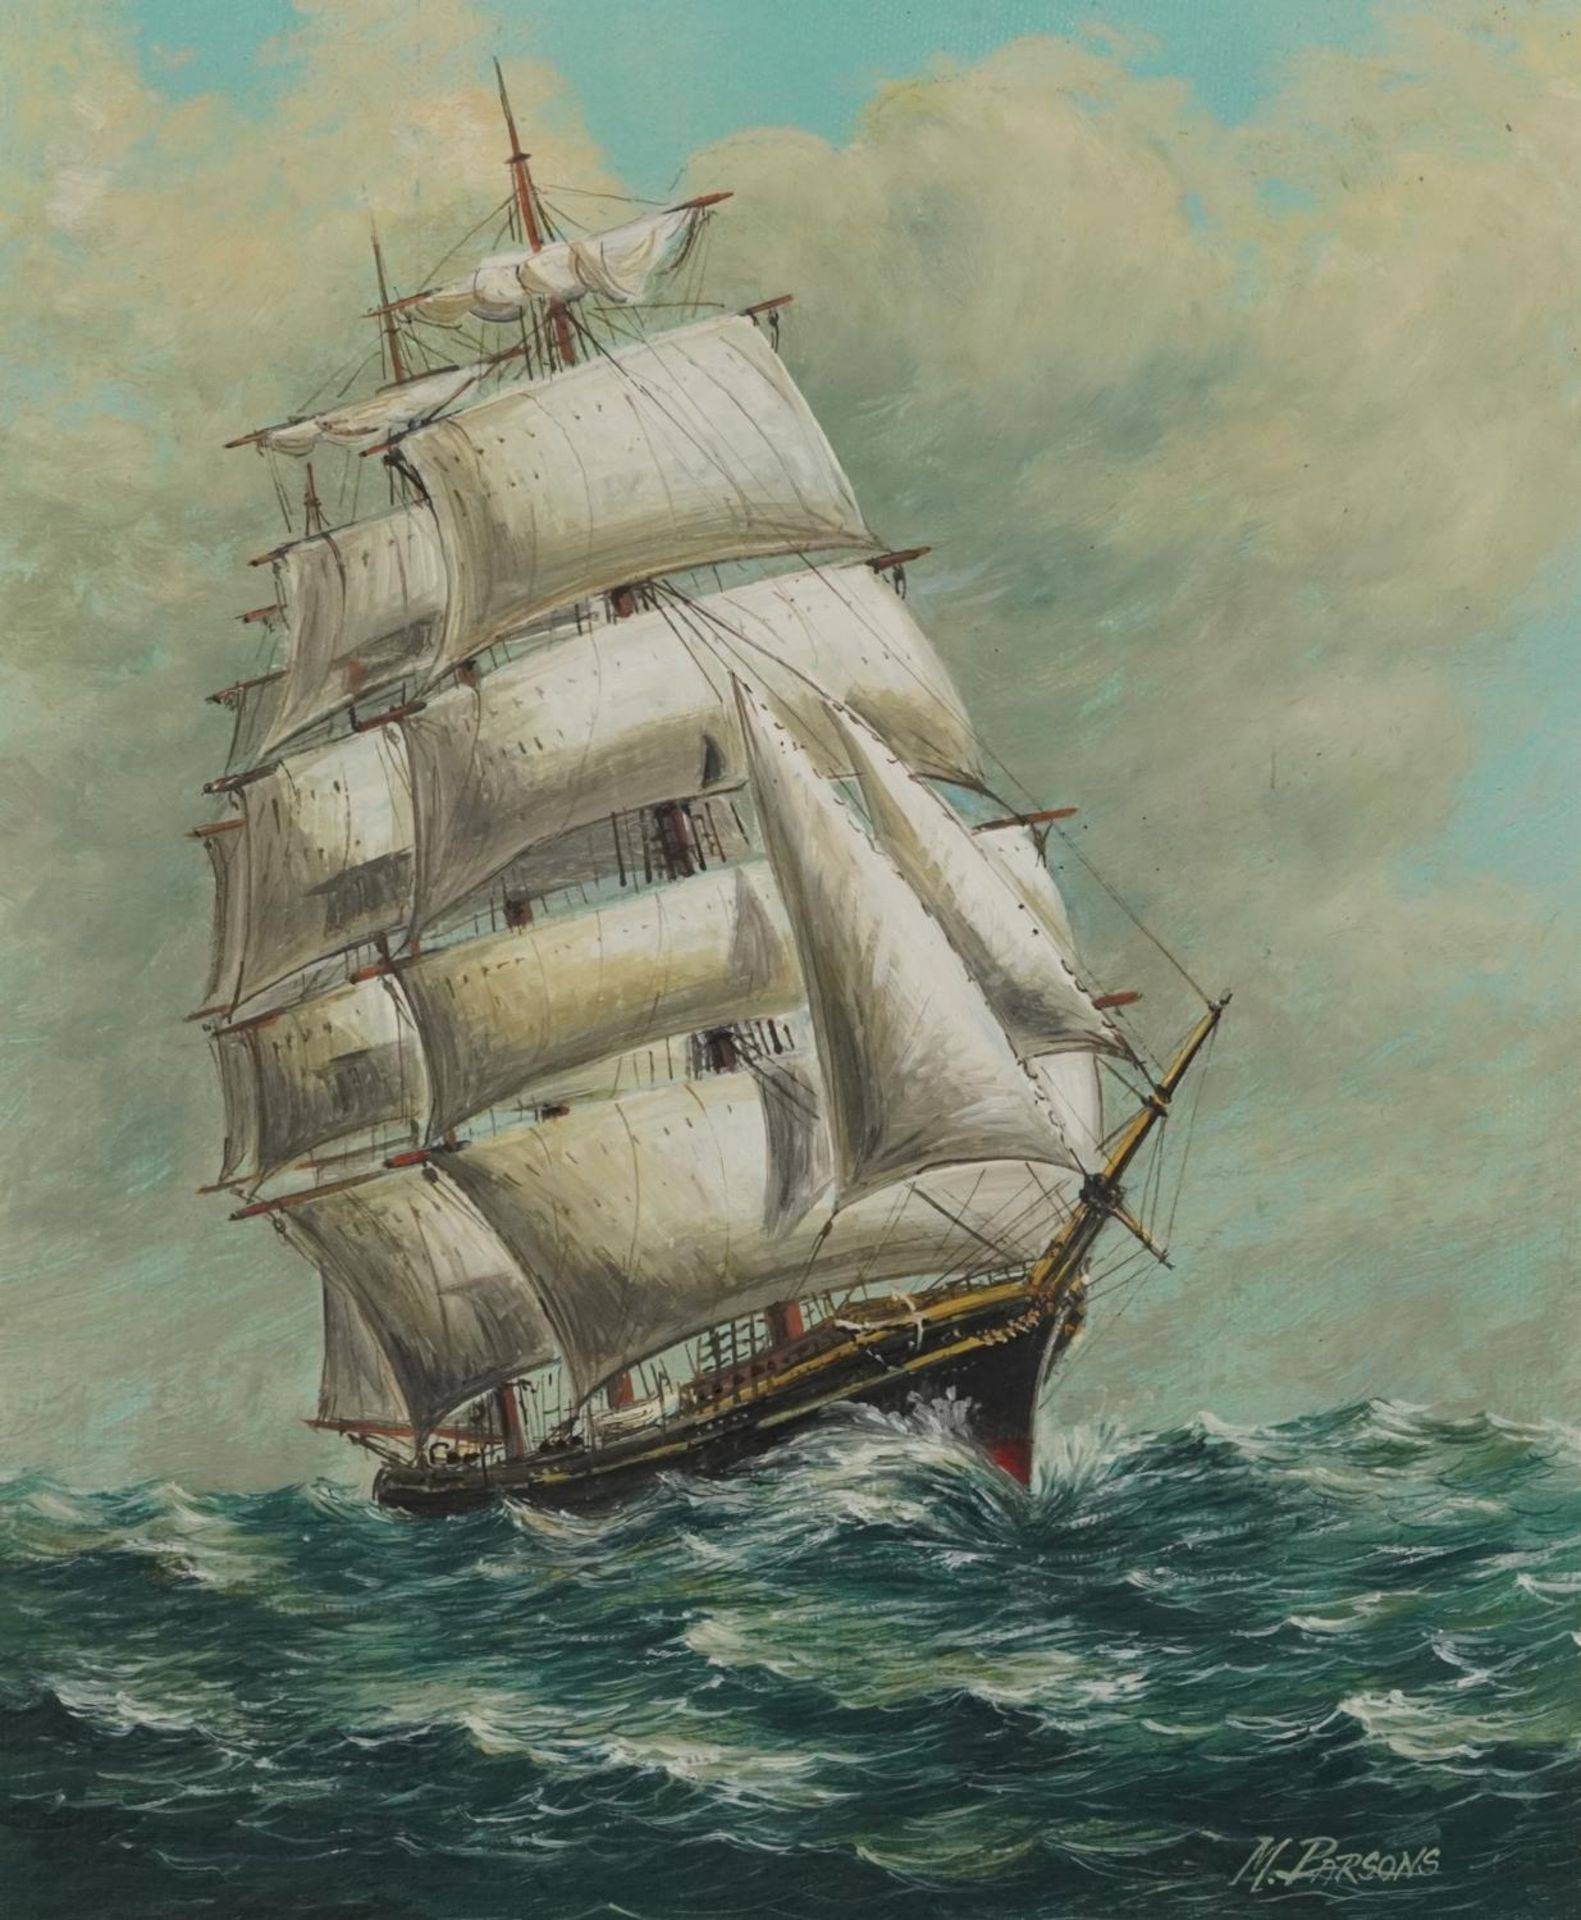 Max Parsons - Schooner at Sea, maritime interest oil on board, mounted and framed, 29cm x 24.5cm